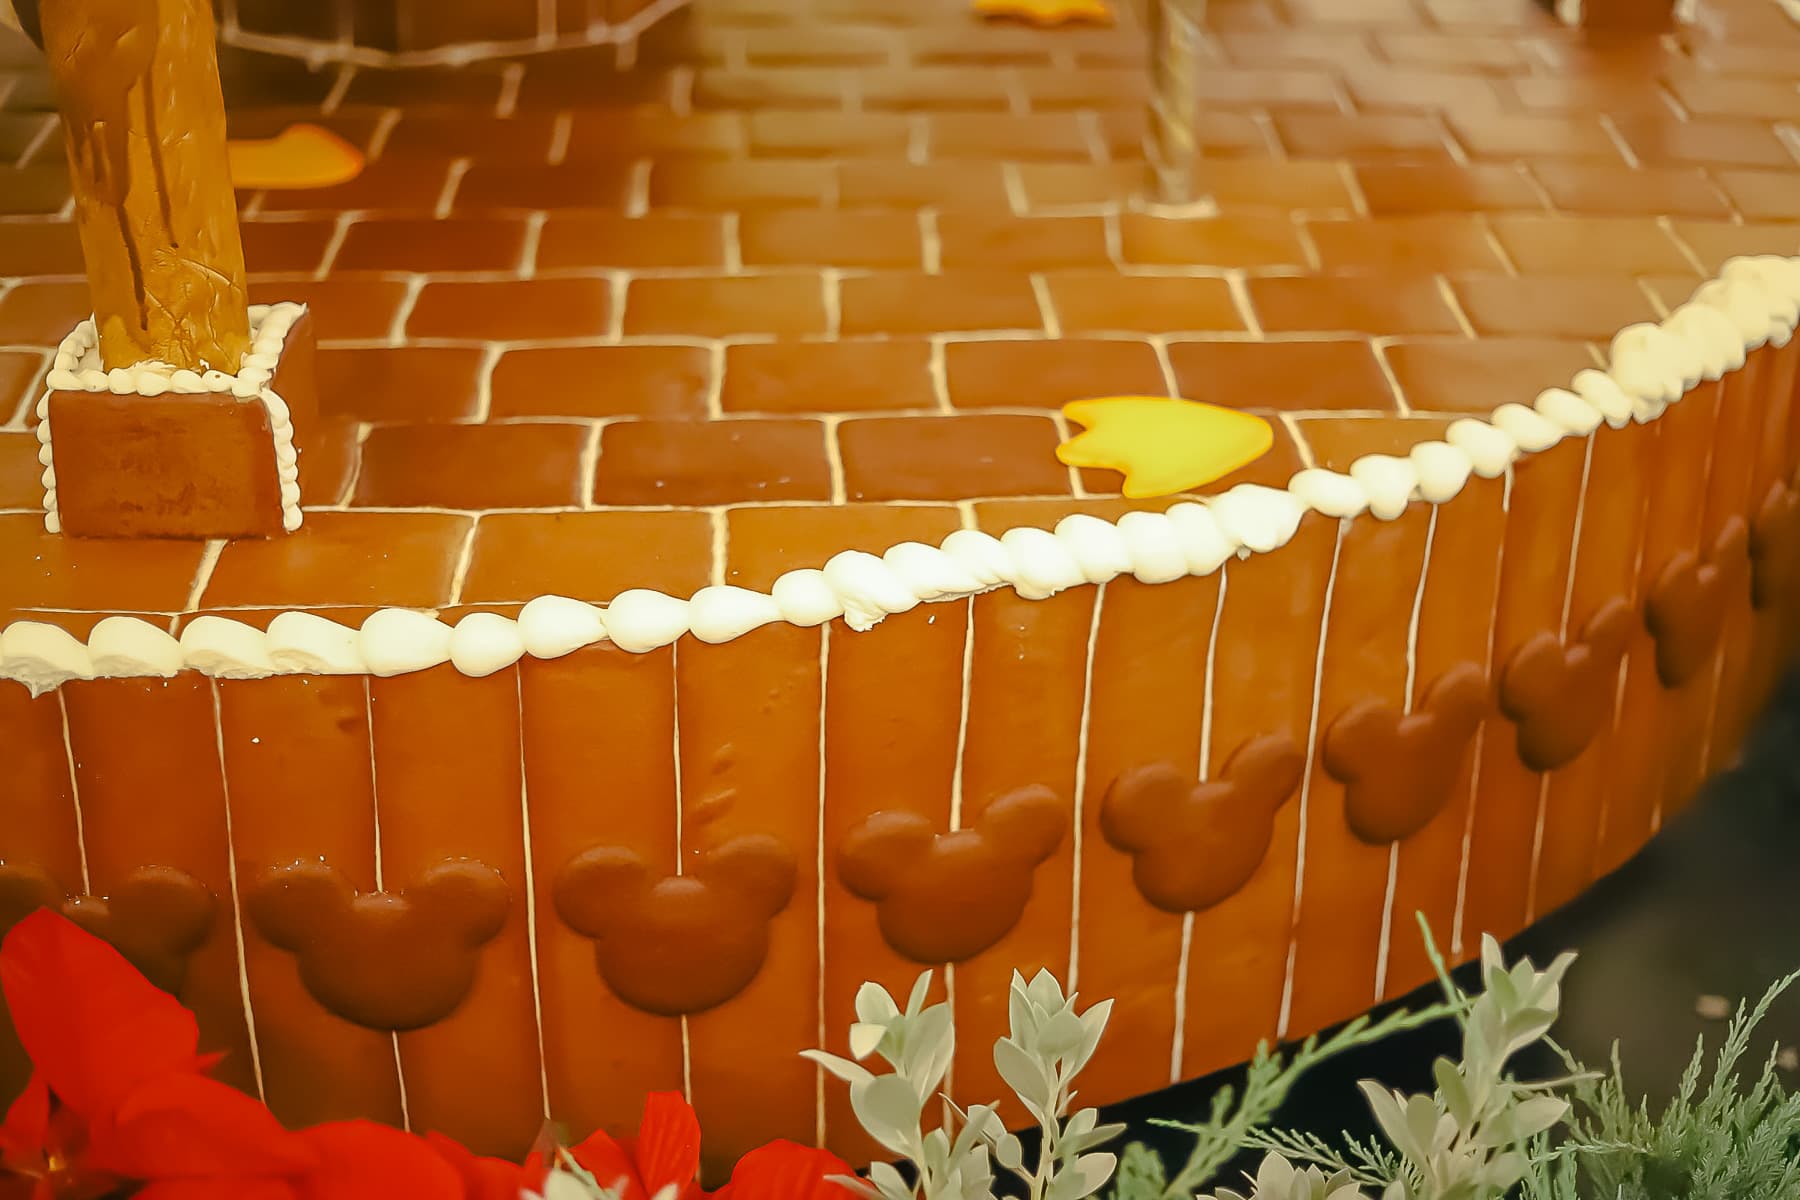 Shows gingerbread bricks with Mickey-shaped cutout on the gingerbread carousel. 